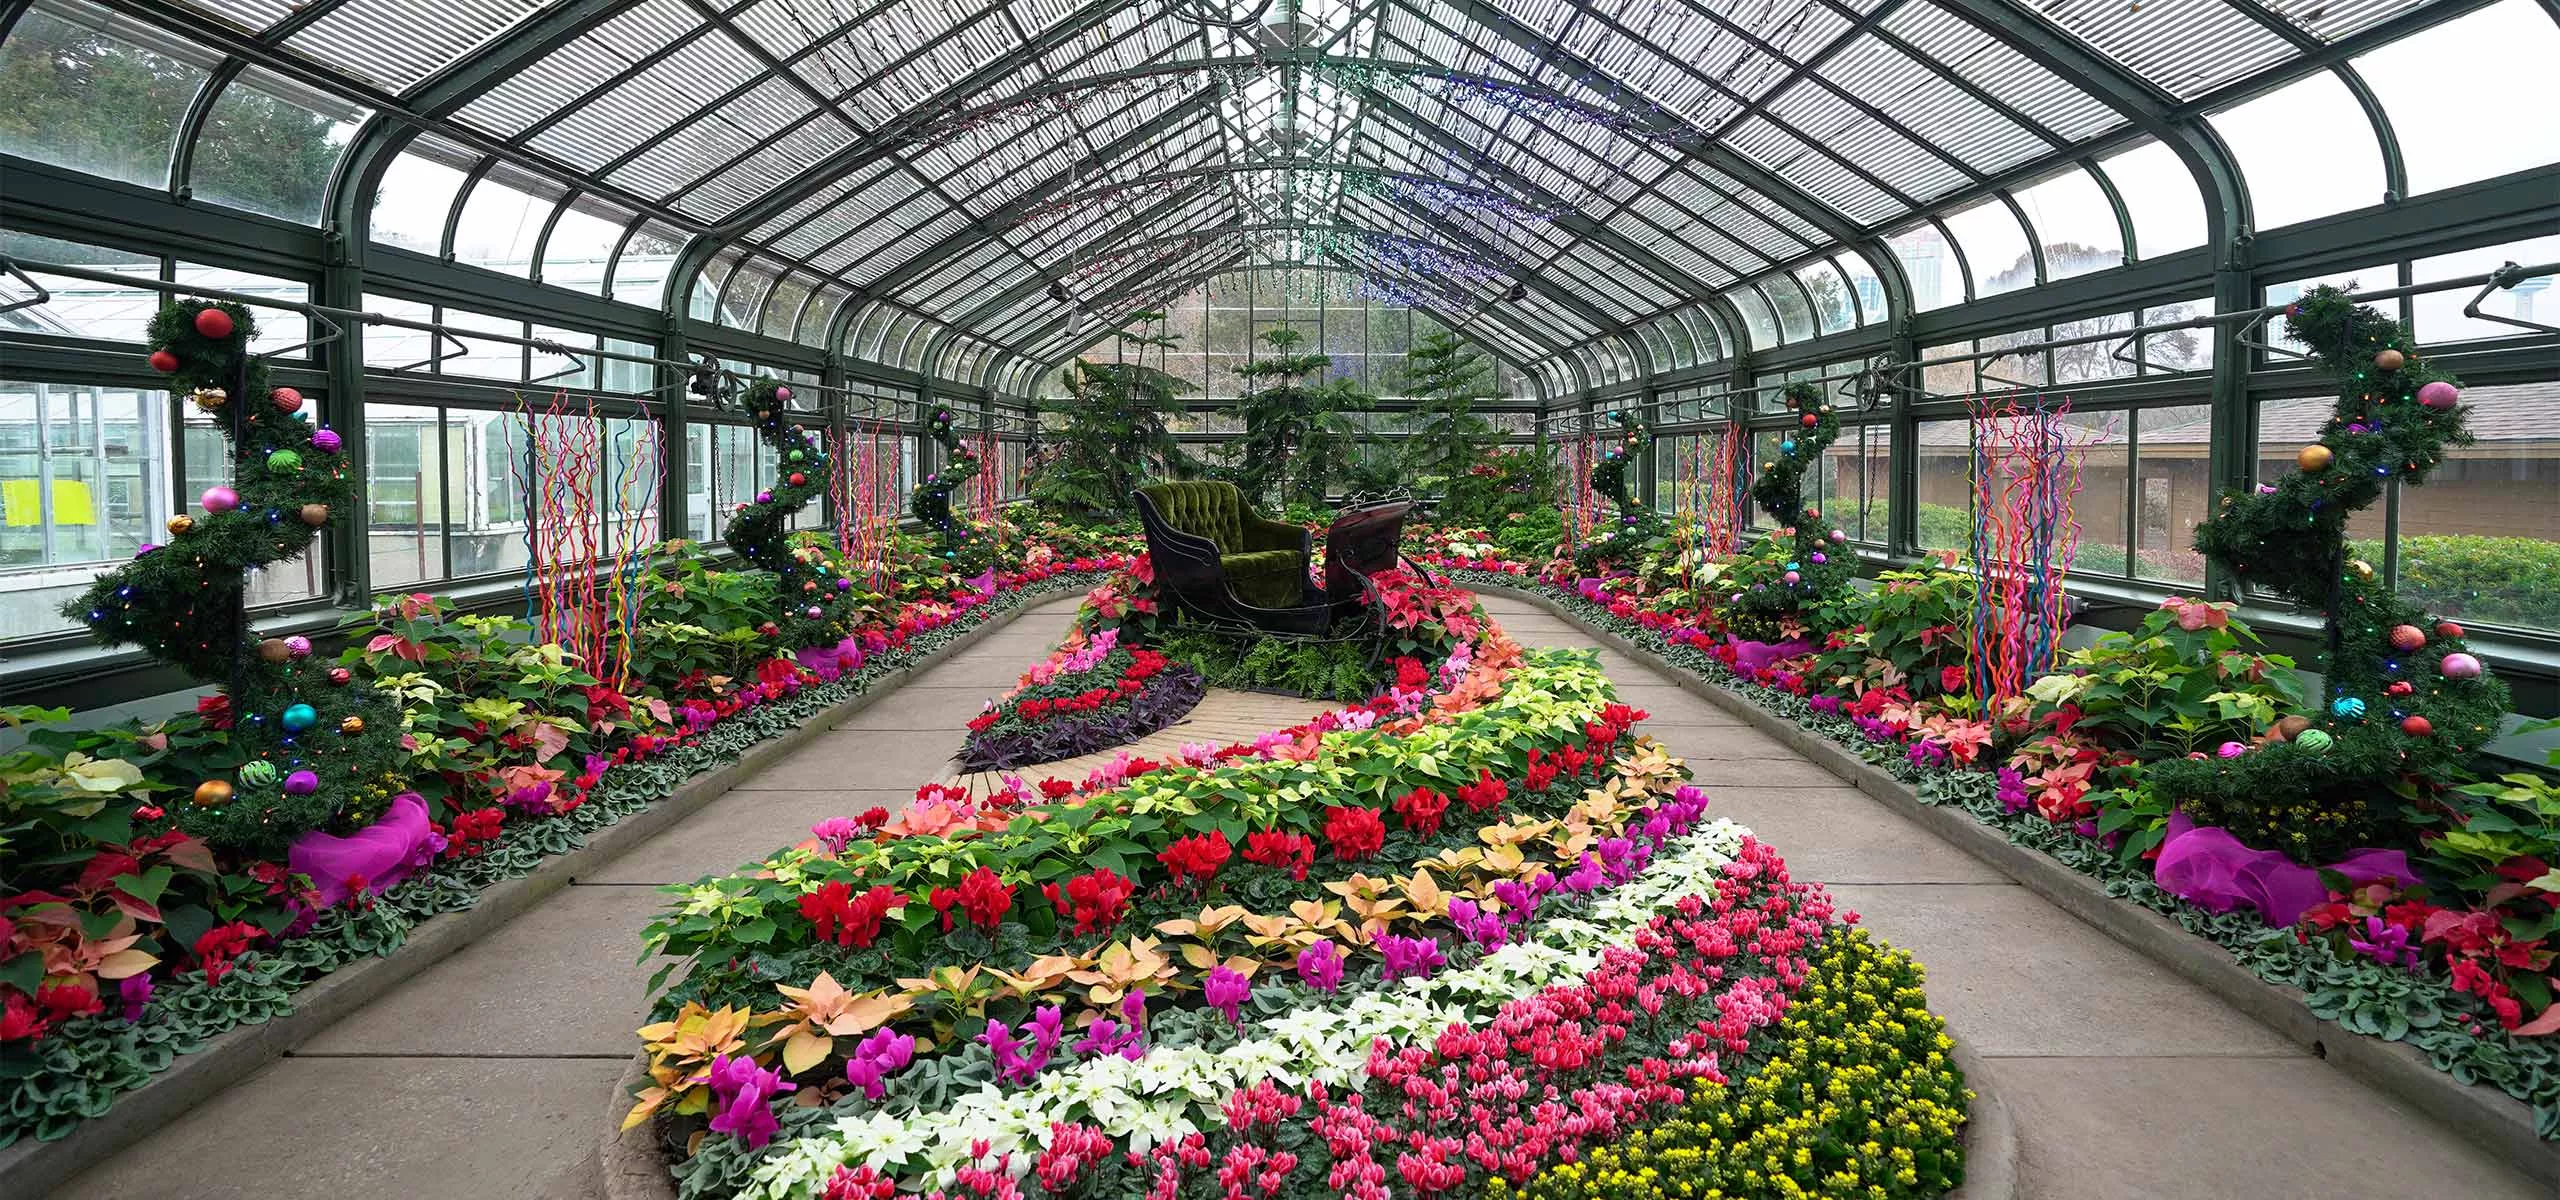 Floral Showhouse in Canada, North America | Gardens - Rated 3.7